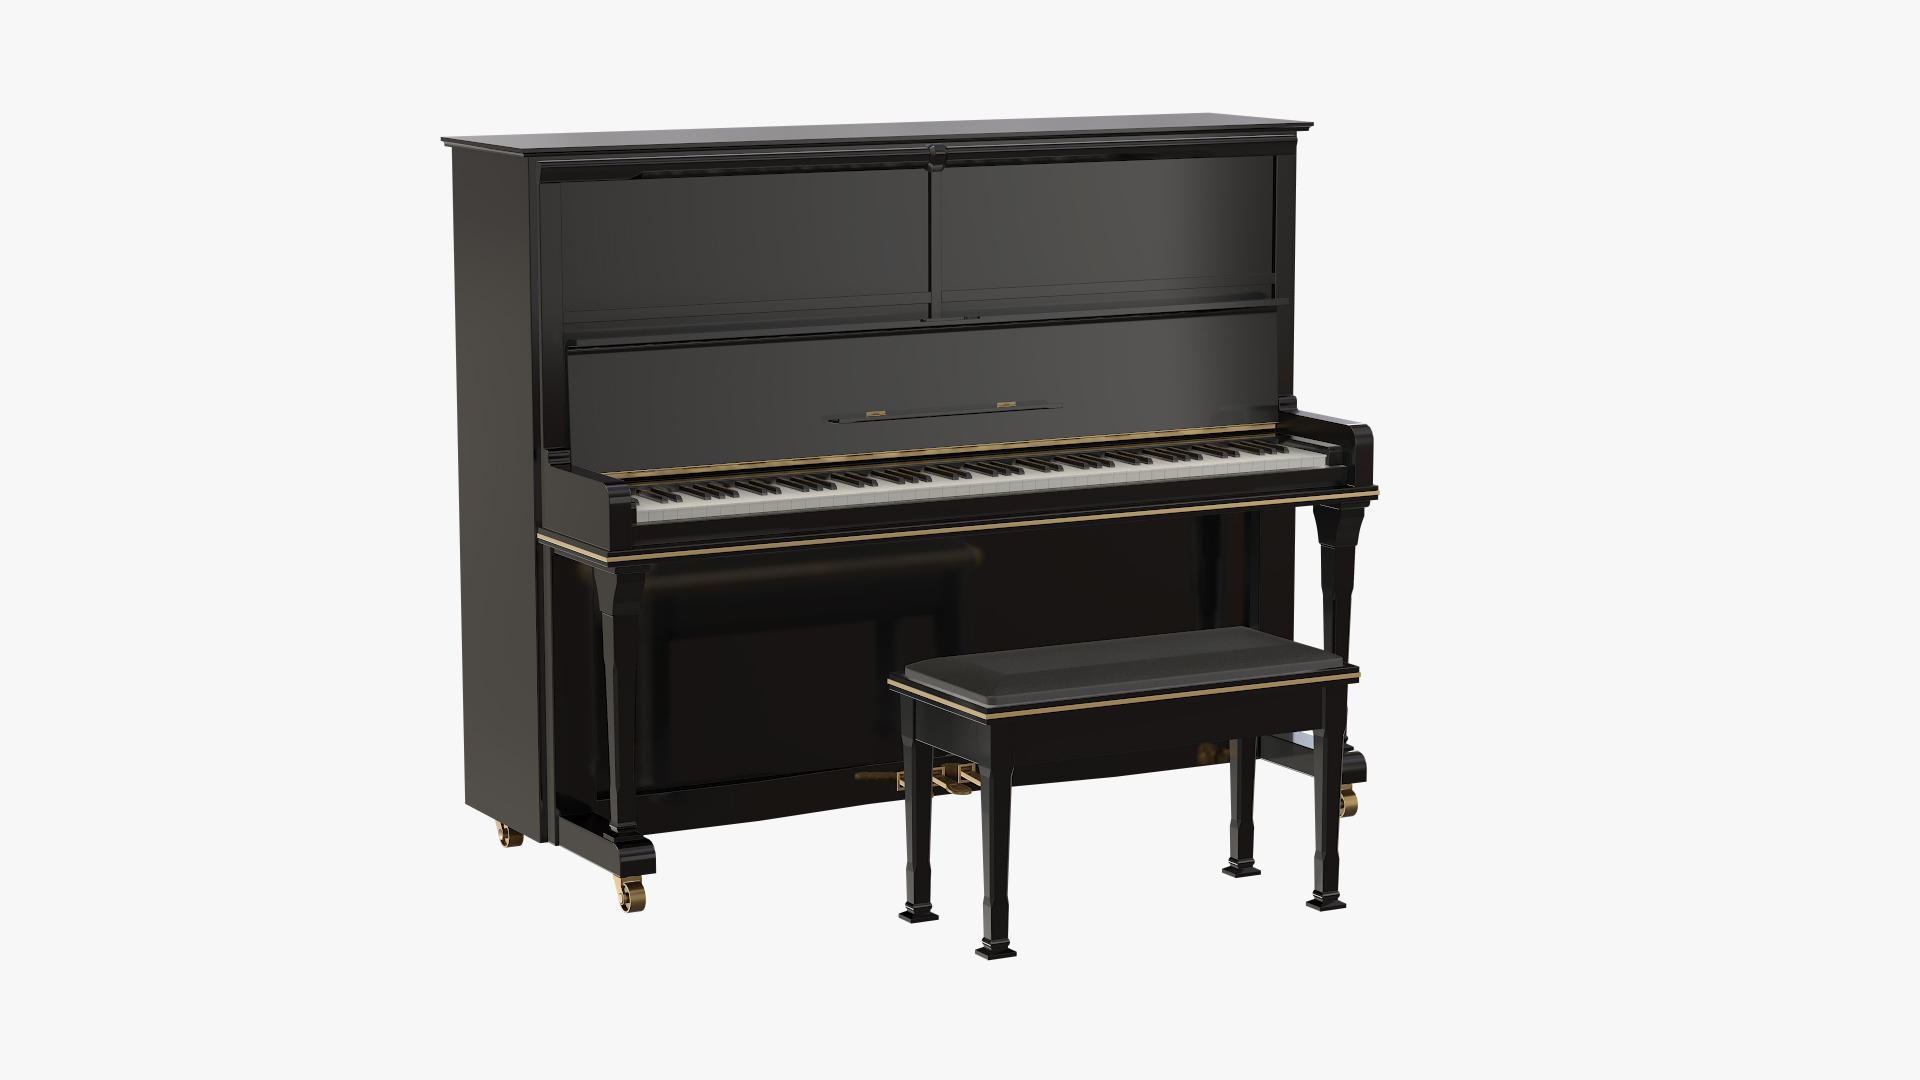 Piano - 3D Model for VRay